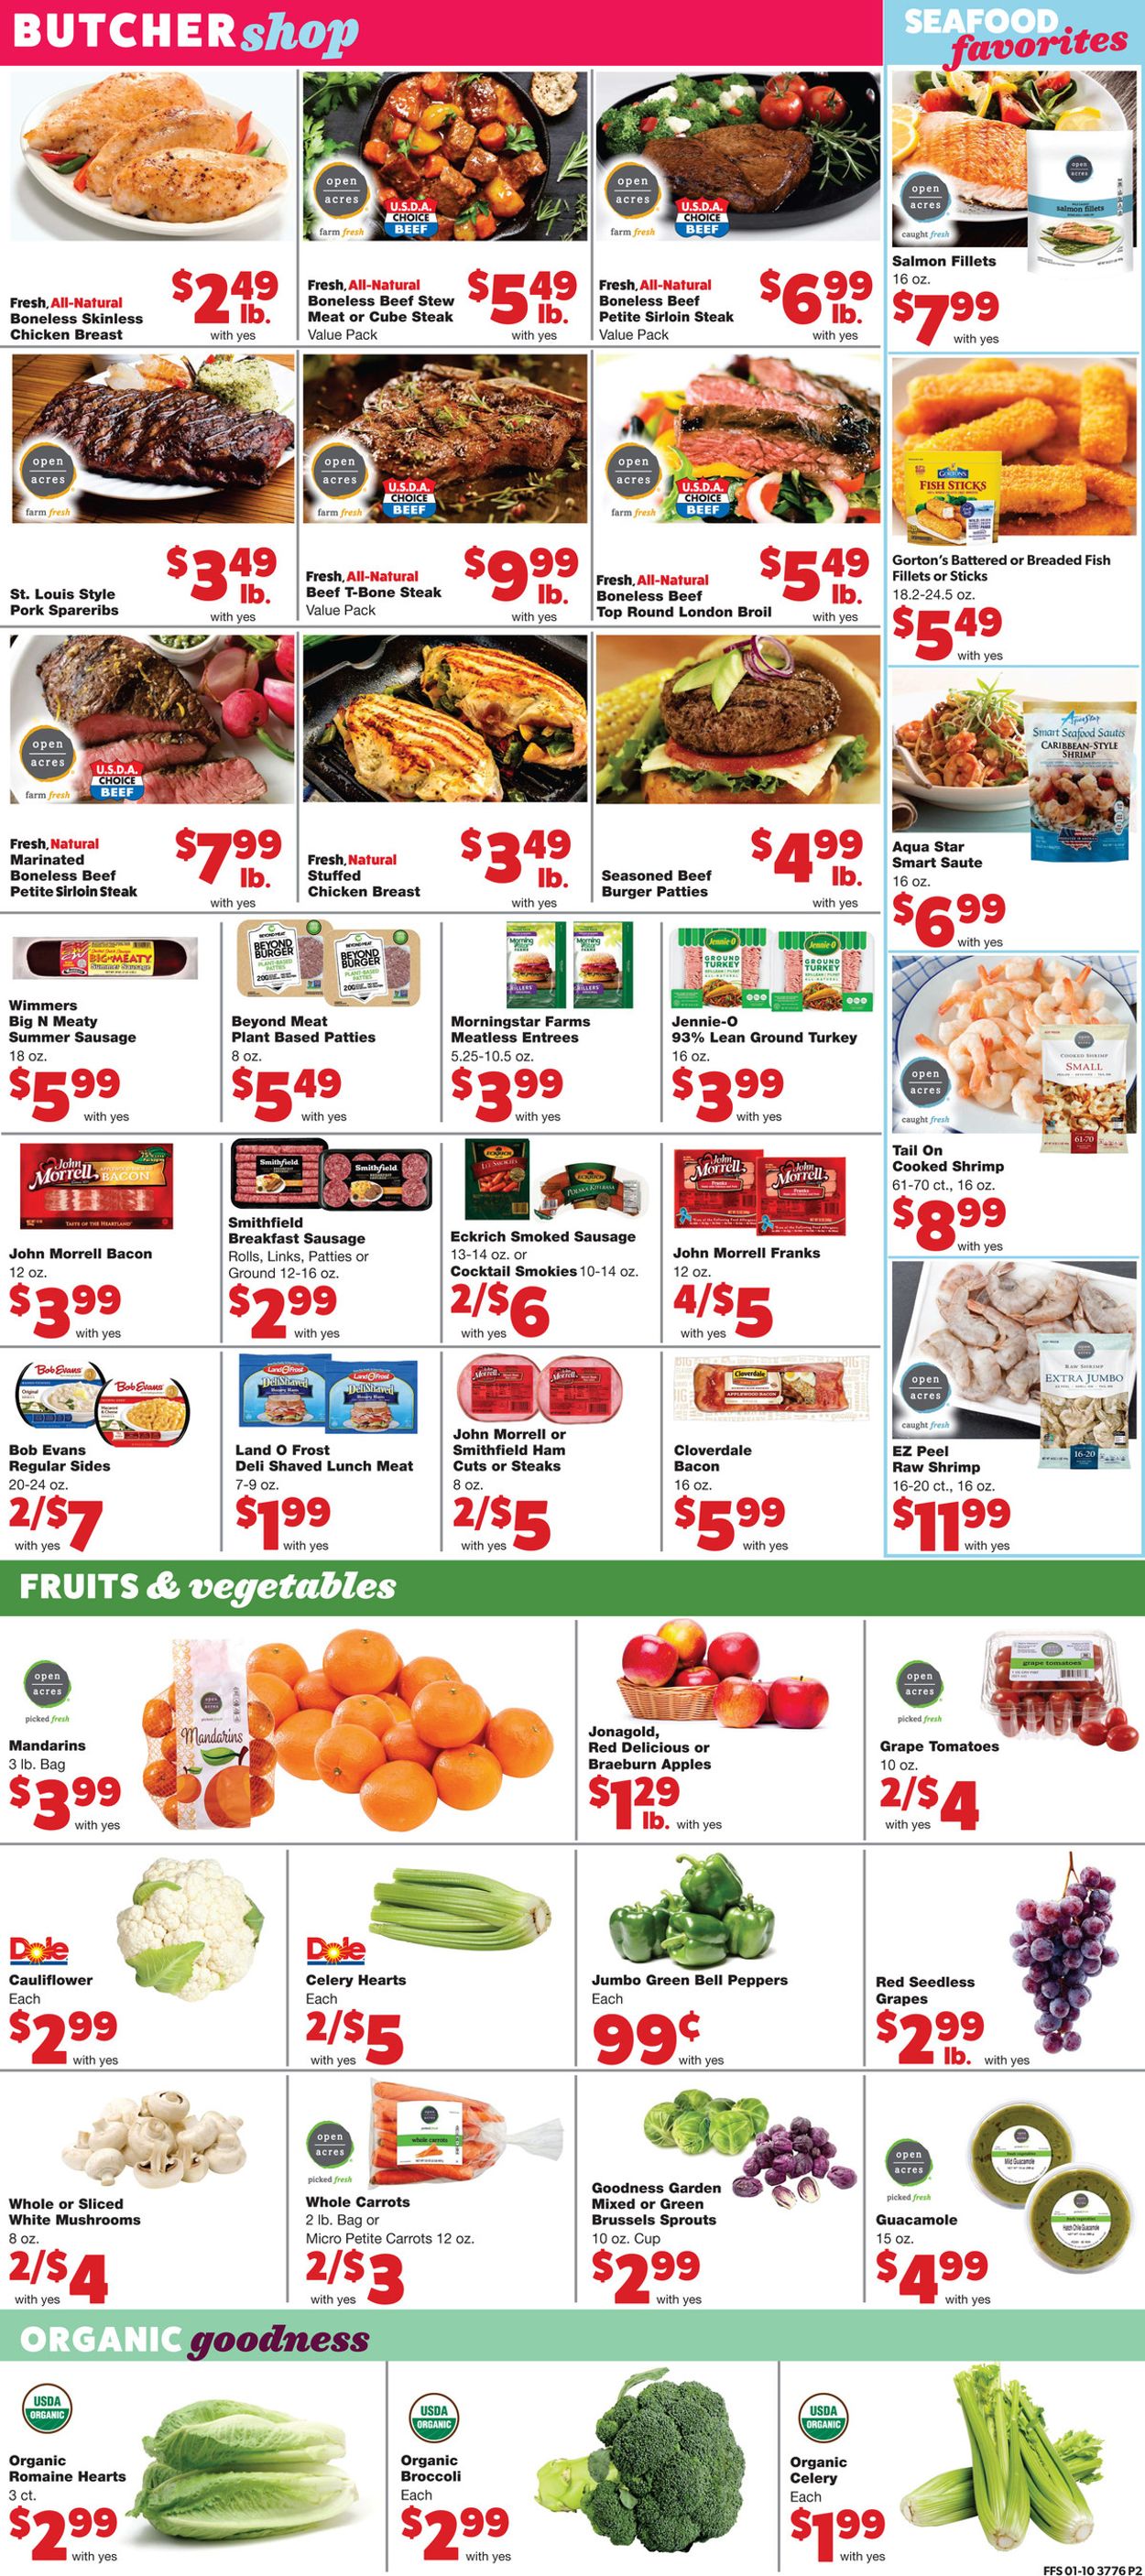 Family Fare Ad from 01/13/2021